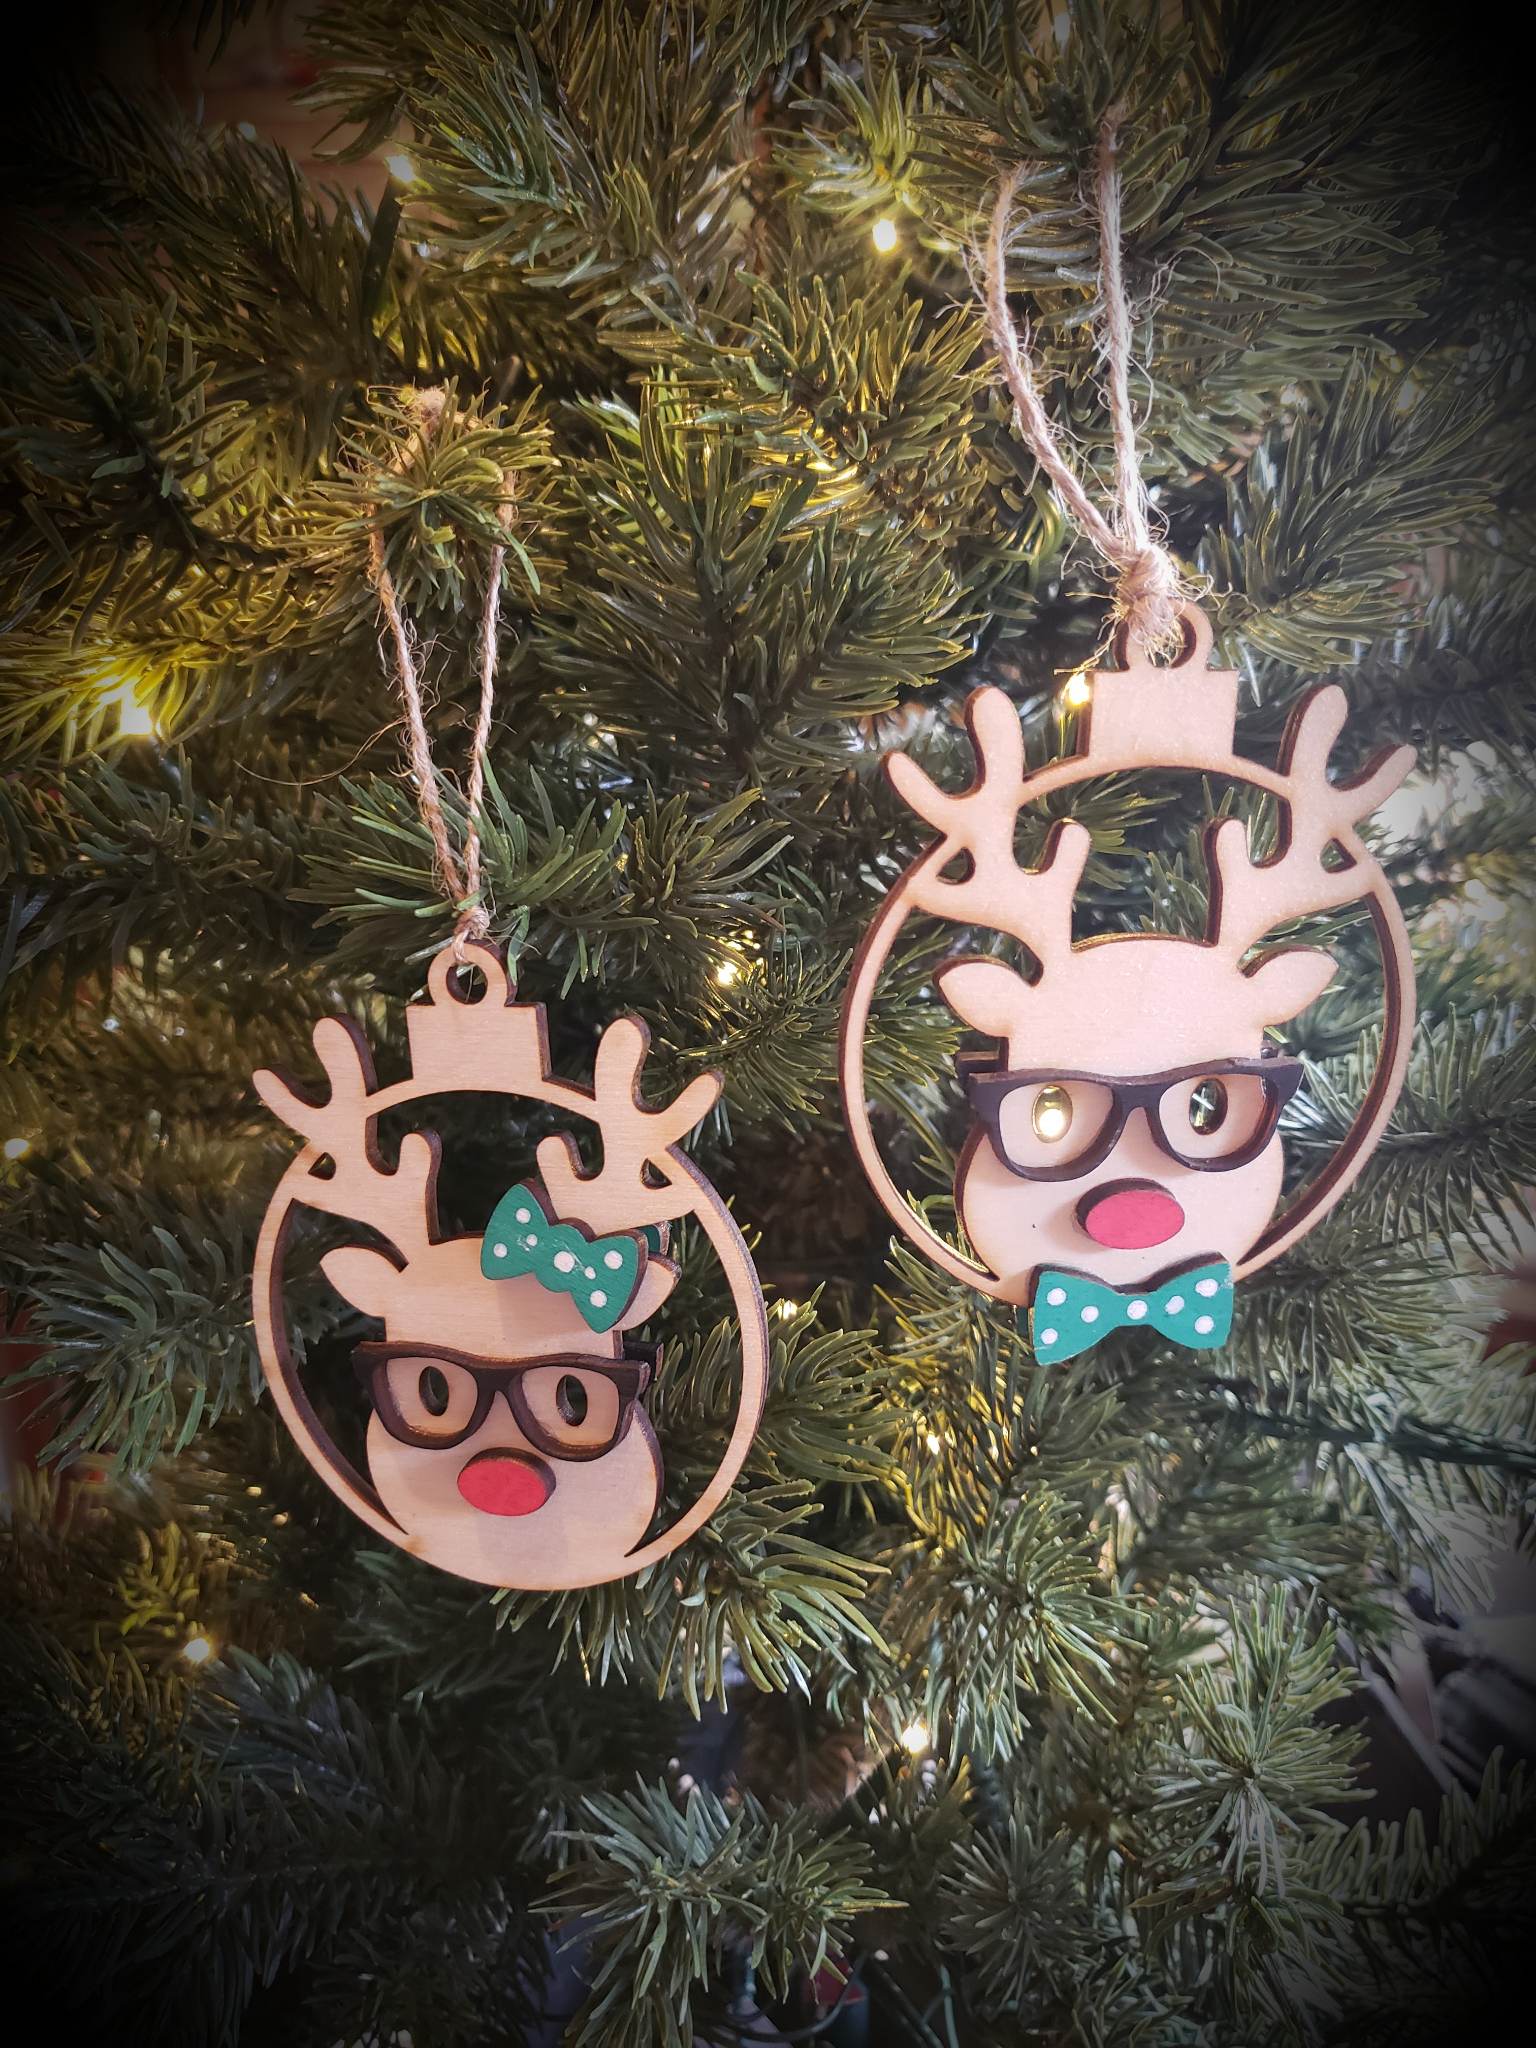  Set your holiday tree apart with this unique Reindeer Ornament with Glasses. Featuring hand-painted accents and your choice of either a Boy or Girl, this 4" ornament is the perfect addition to your holiday décor. Each ornament is custom-made to order so you can be sure it will be ready to ship in 5-7 days. Create a one-of-a-kind look for your home this season with this charming Reindeer Ornament.